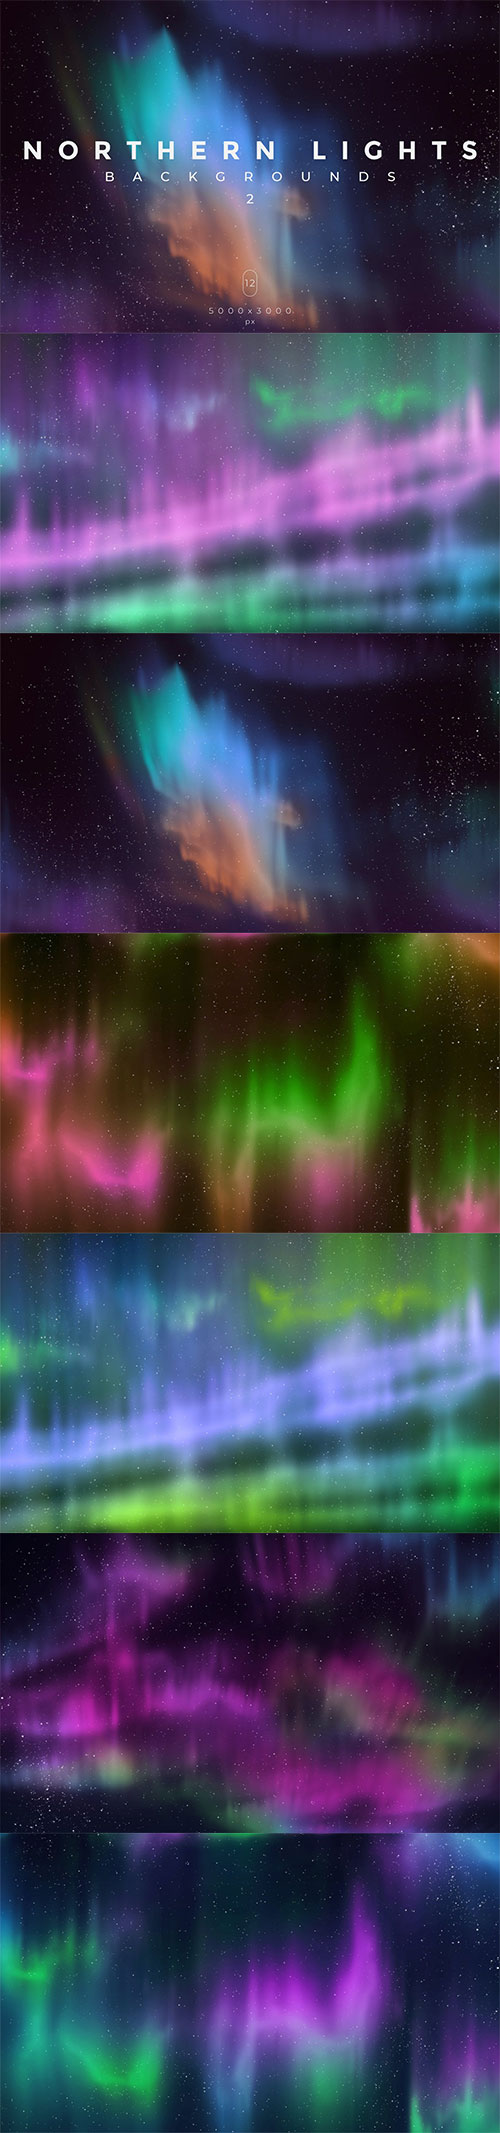 Northern Lights Backgrounds